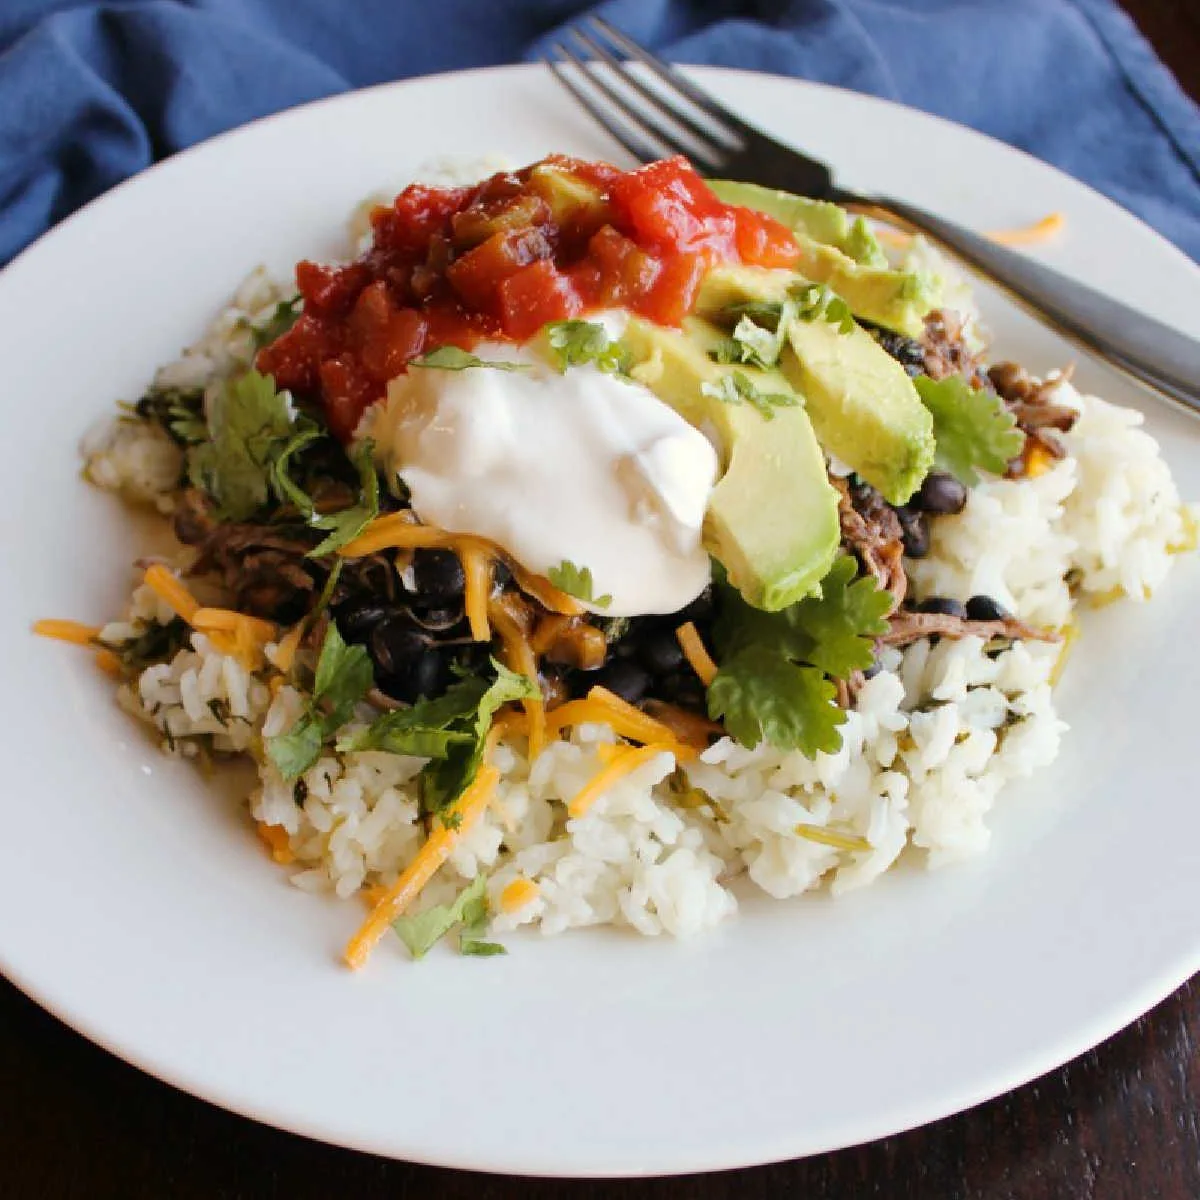 burrito bowl consisting of rice toped with salsa chicken, avocado, sour cream, salsa and more.